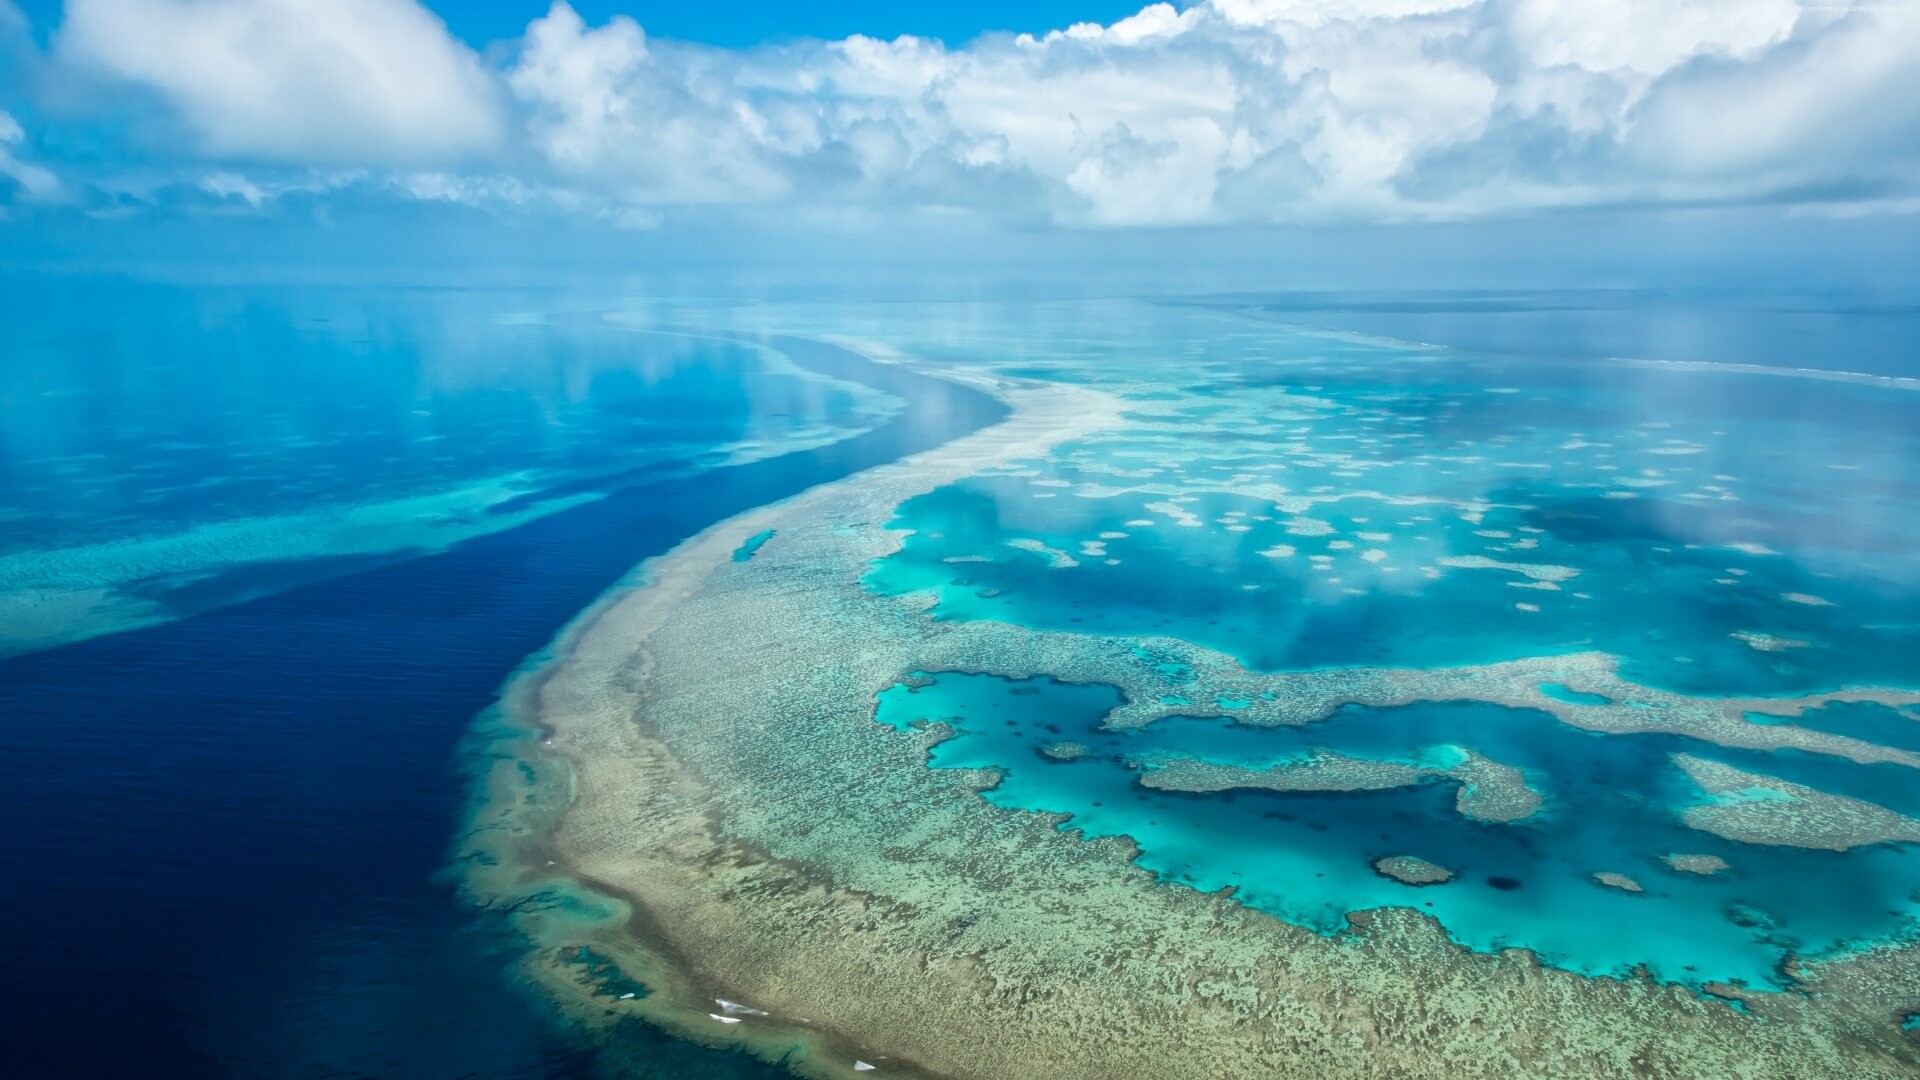 Great Barrier Reef: A distinct feature of the East Australian Cordillera division, Aerial view. 1920x1080 Full HD Background.